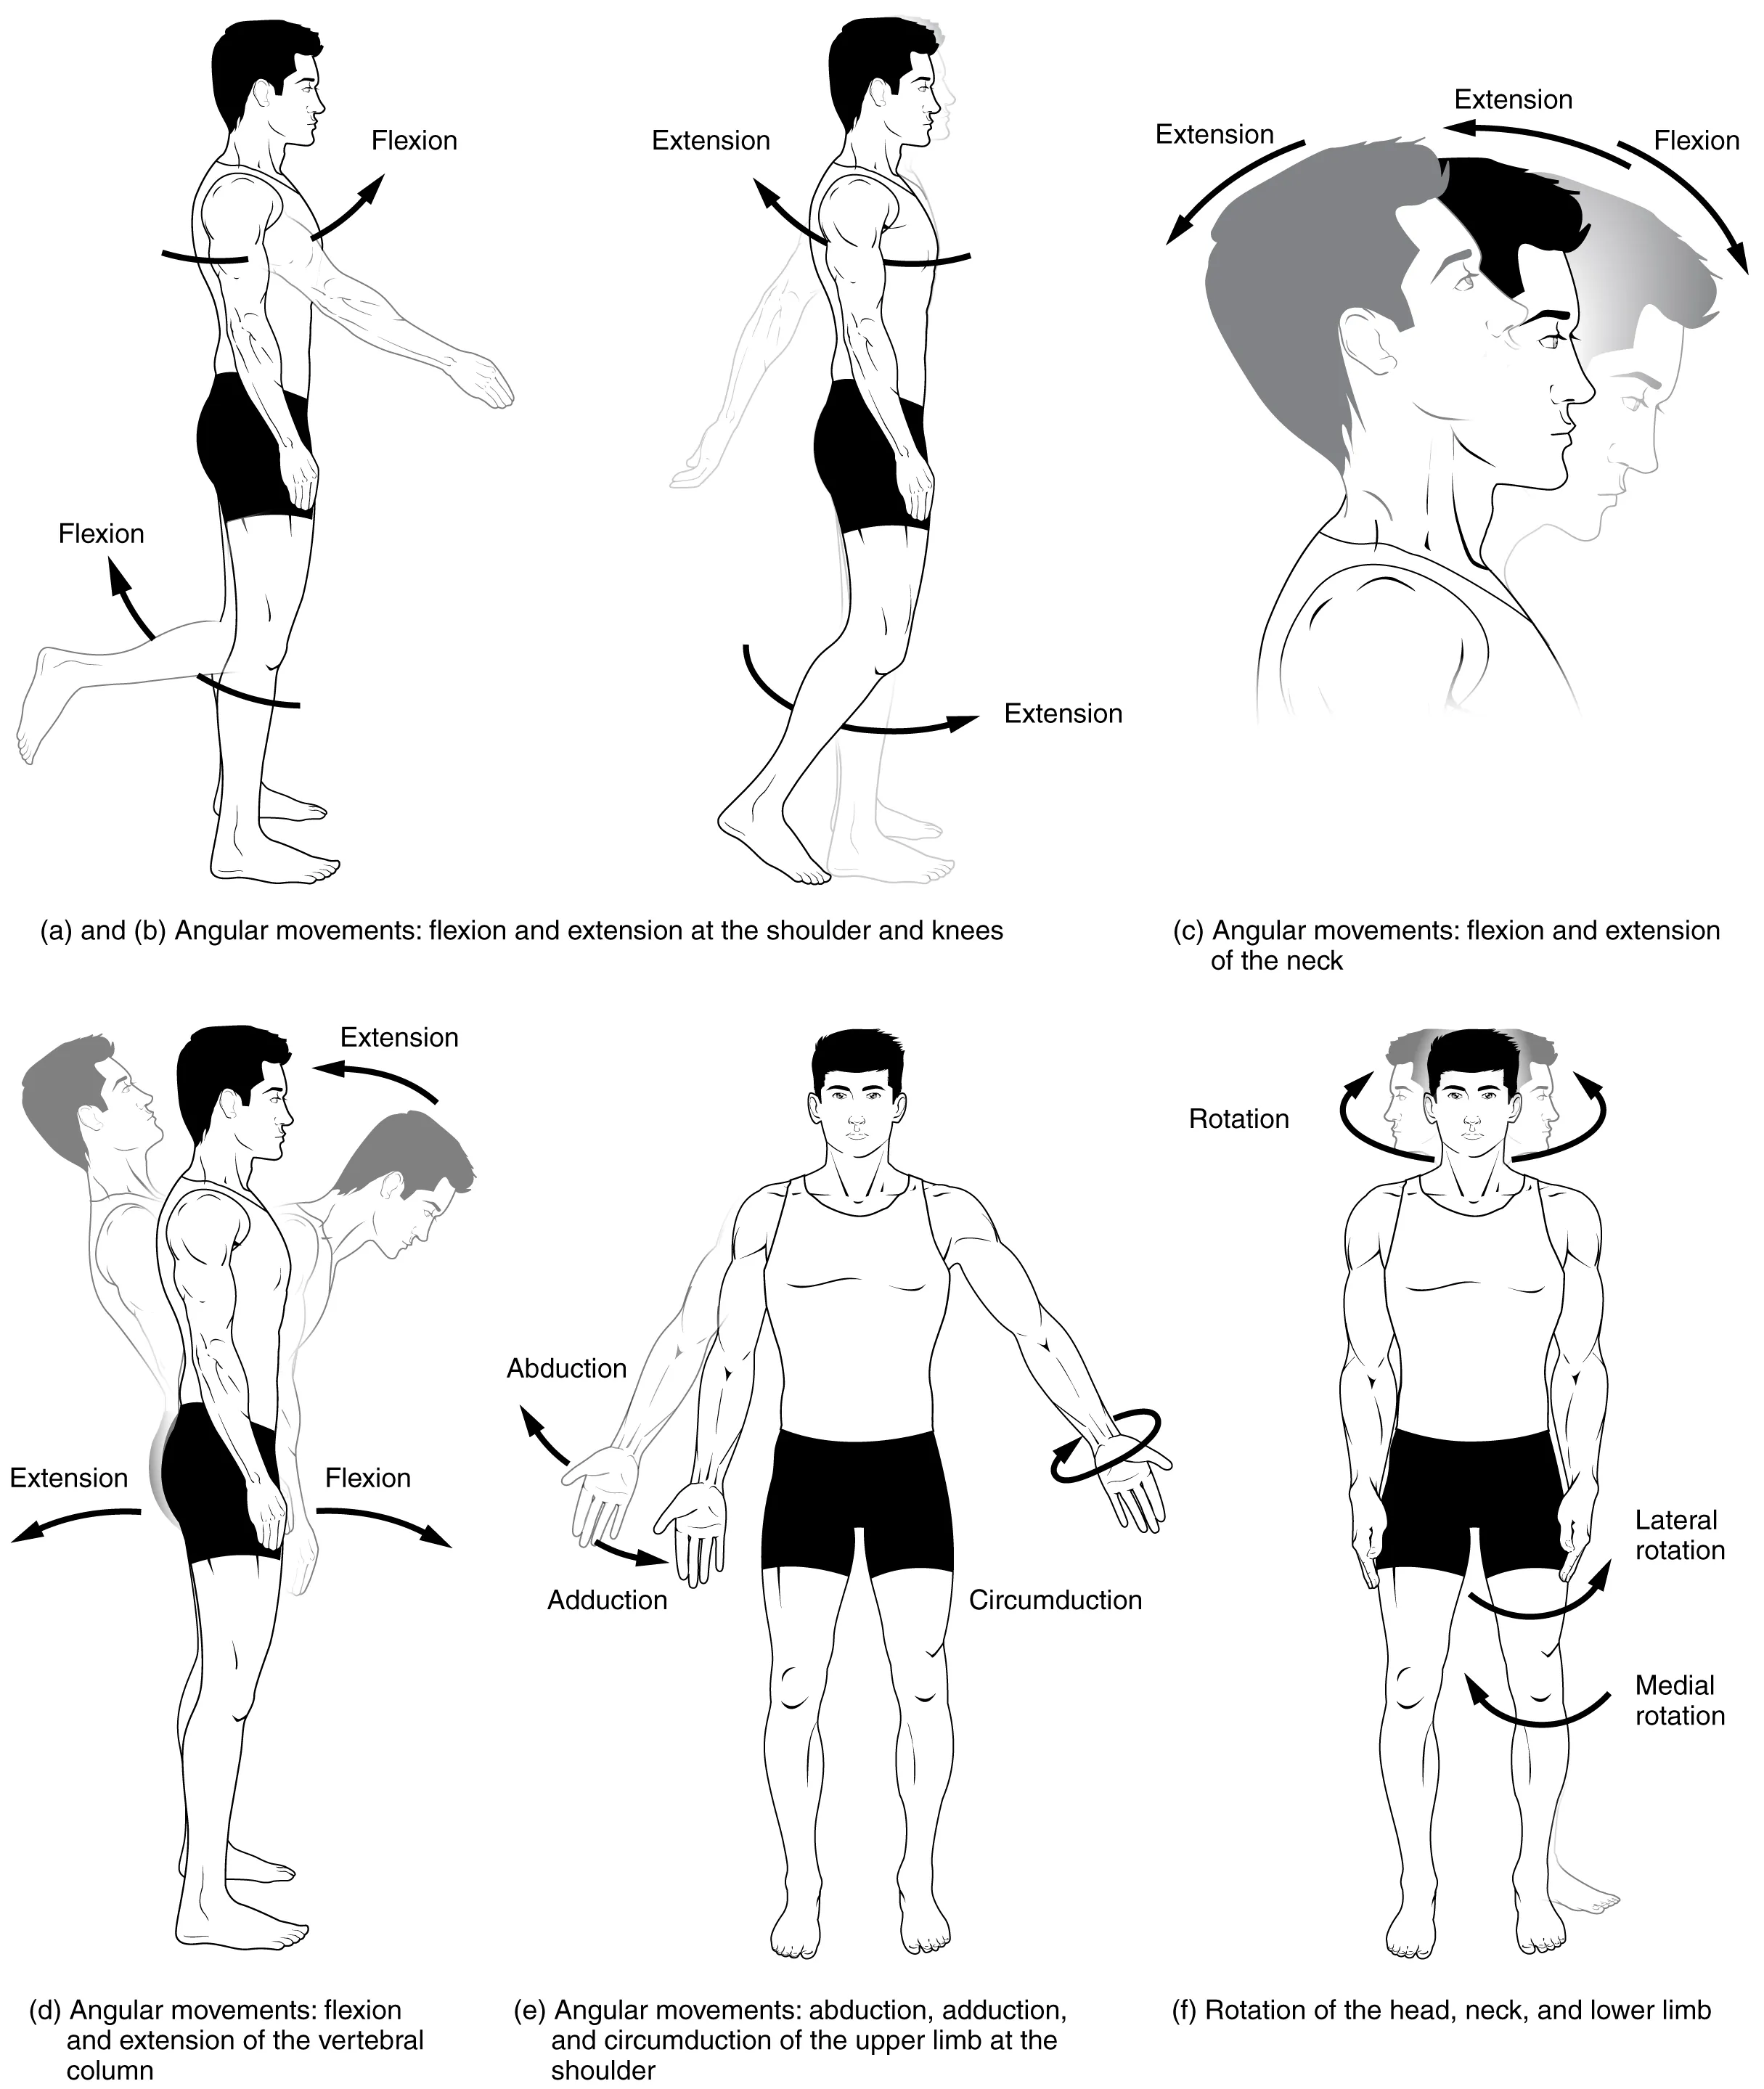 This multi-part image shows different types of movements that are possible by different joints in the body.